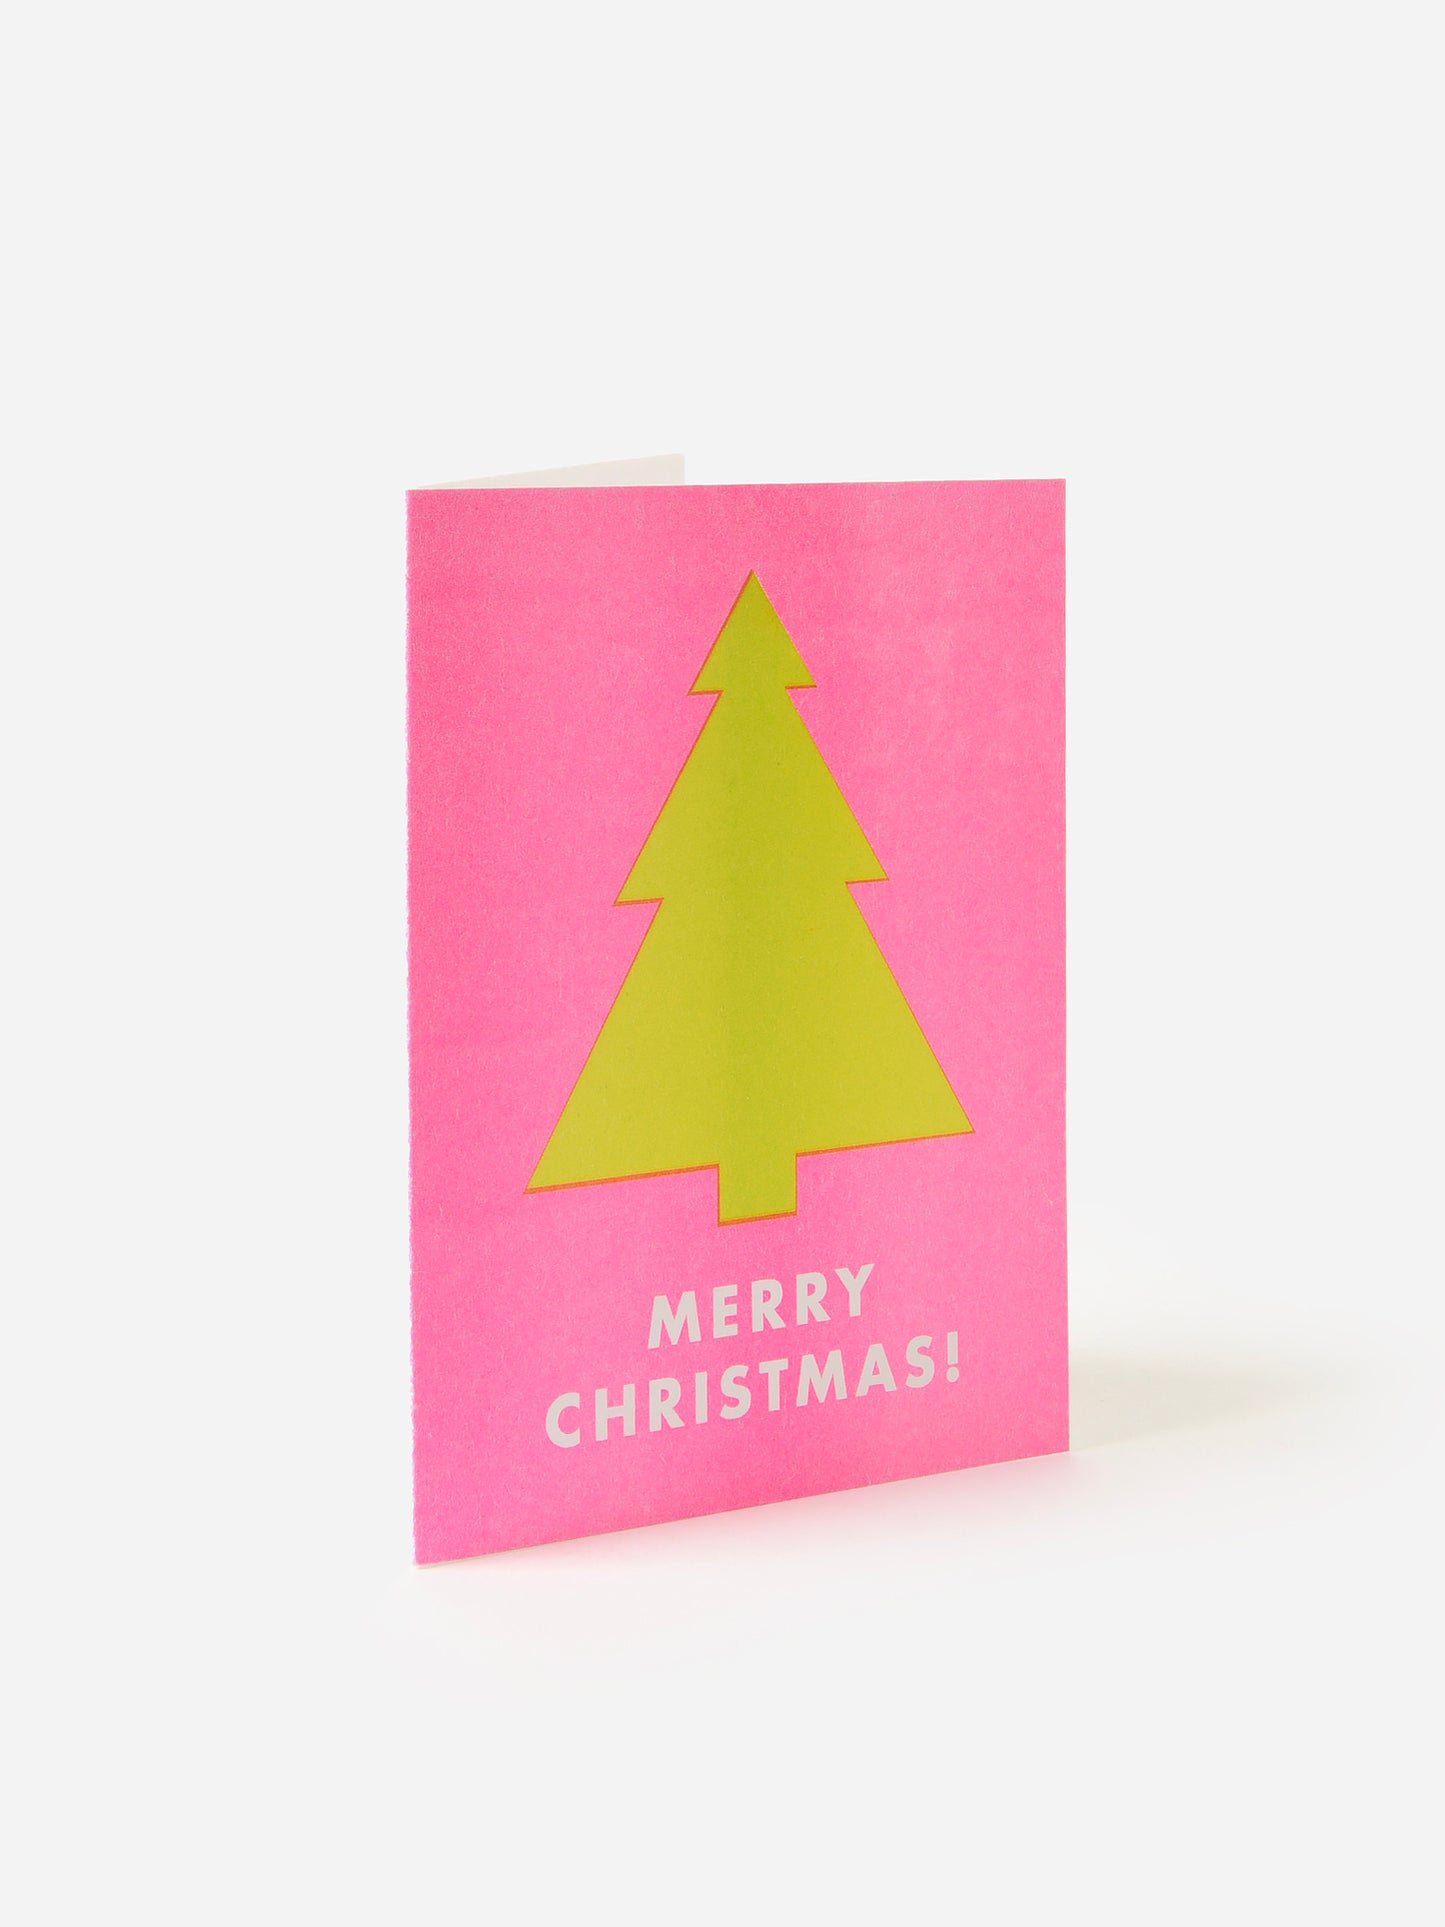 Next Chapter Studio Holiday Shapes Tree Card